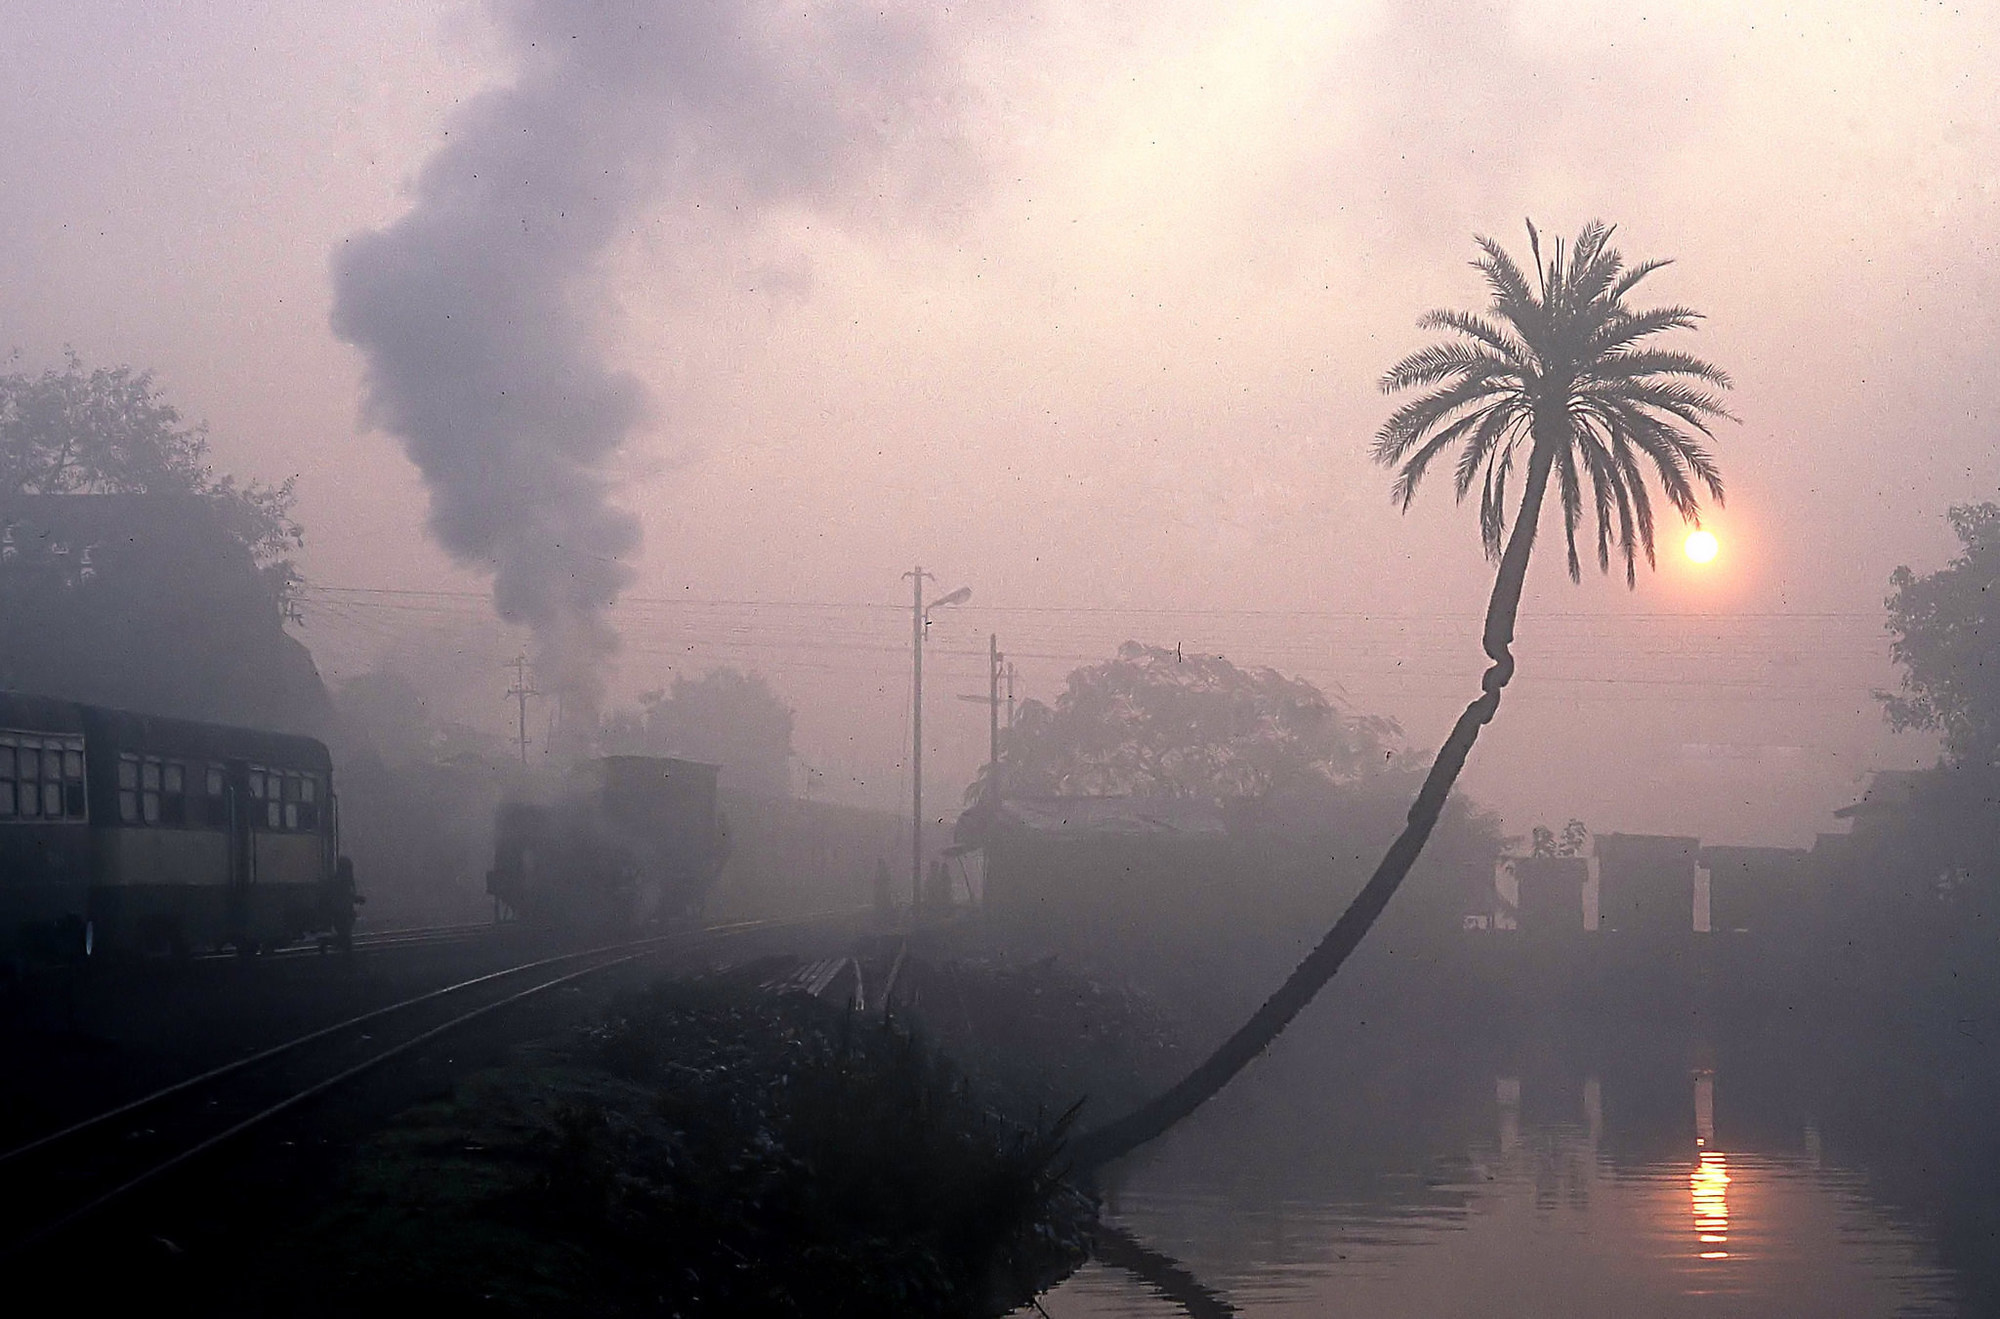 13 of the 20 most polluted cities in world are located in India.